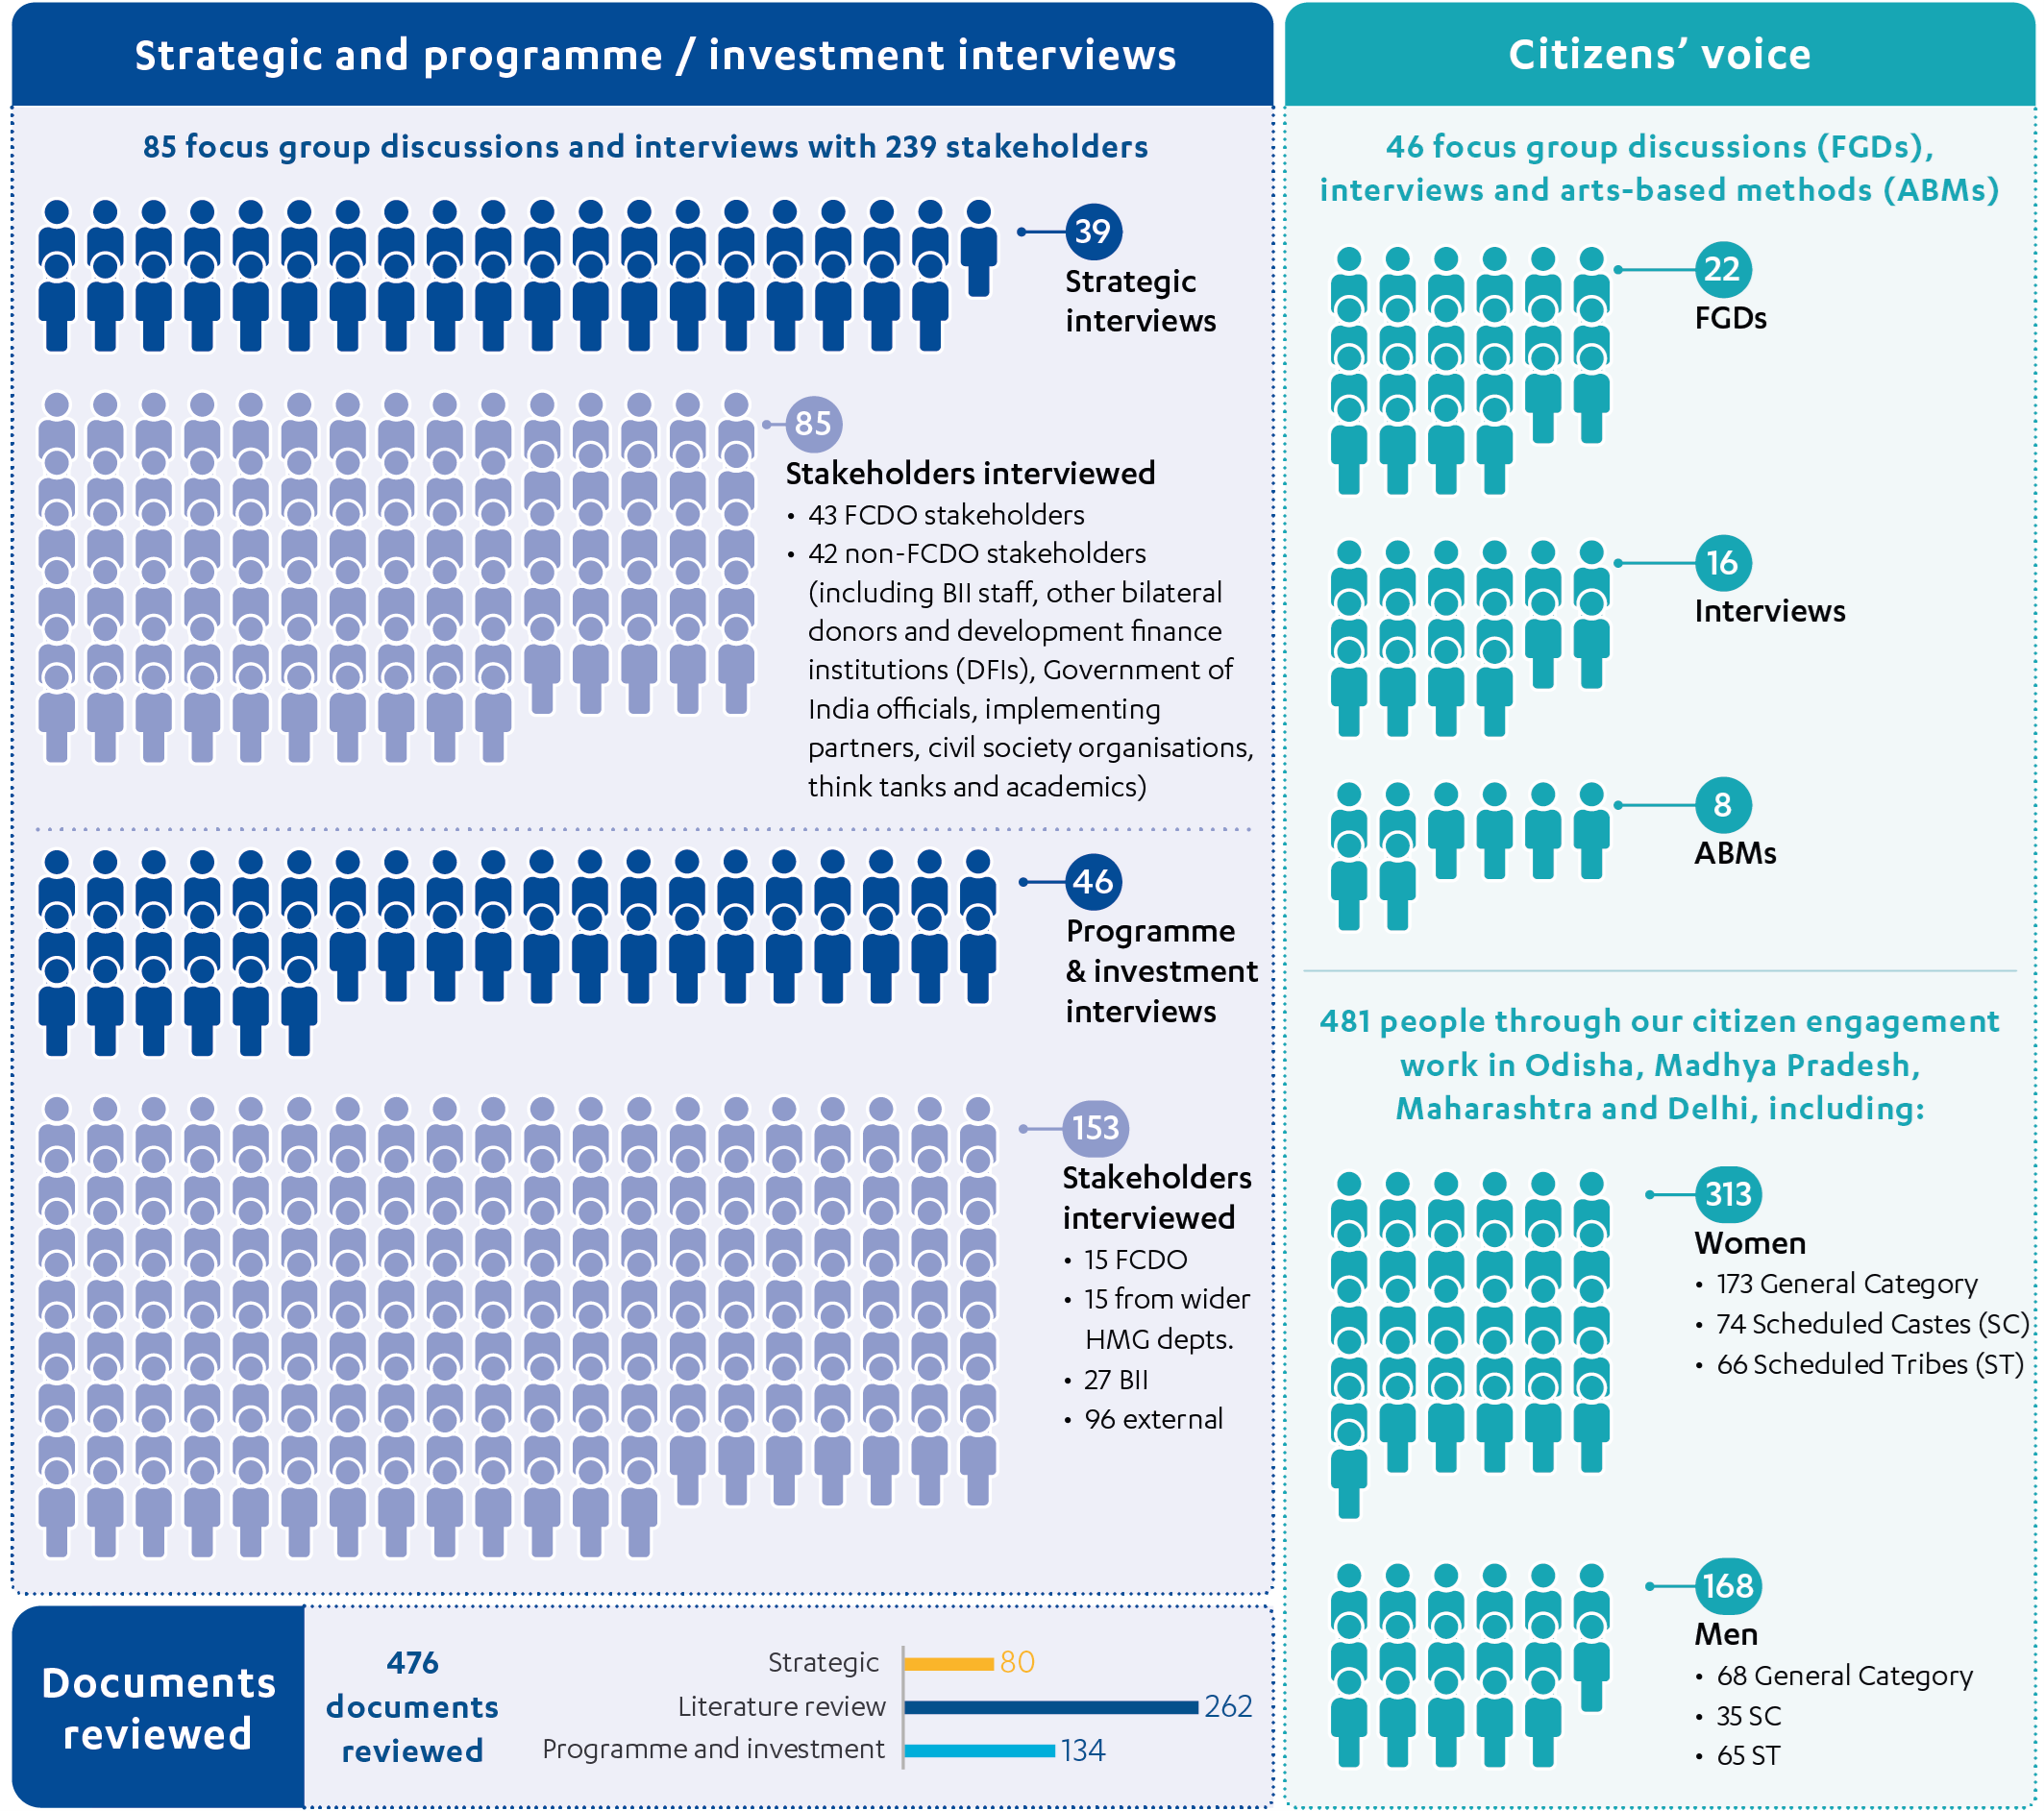 Infographic showing number and type of interviews and citizen focus groups